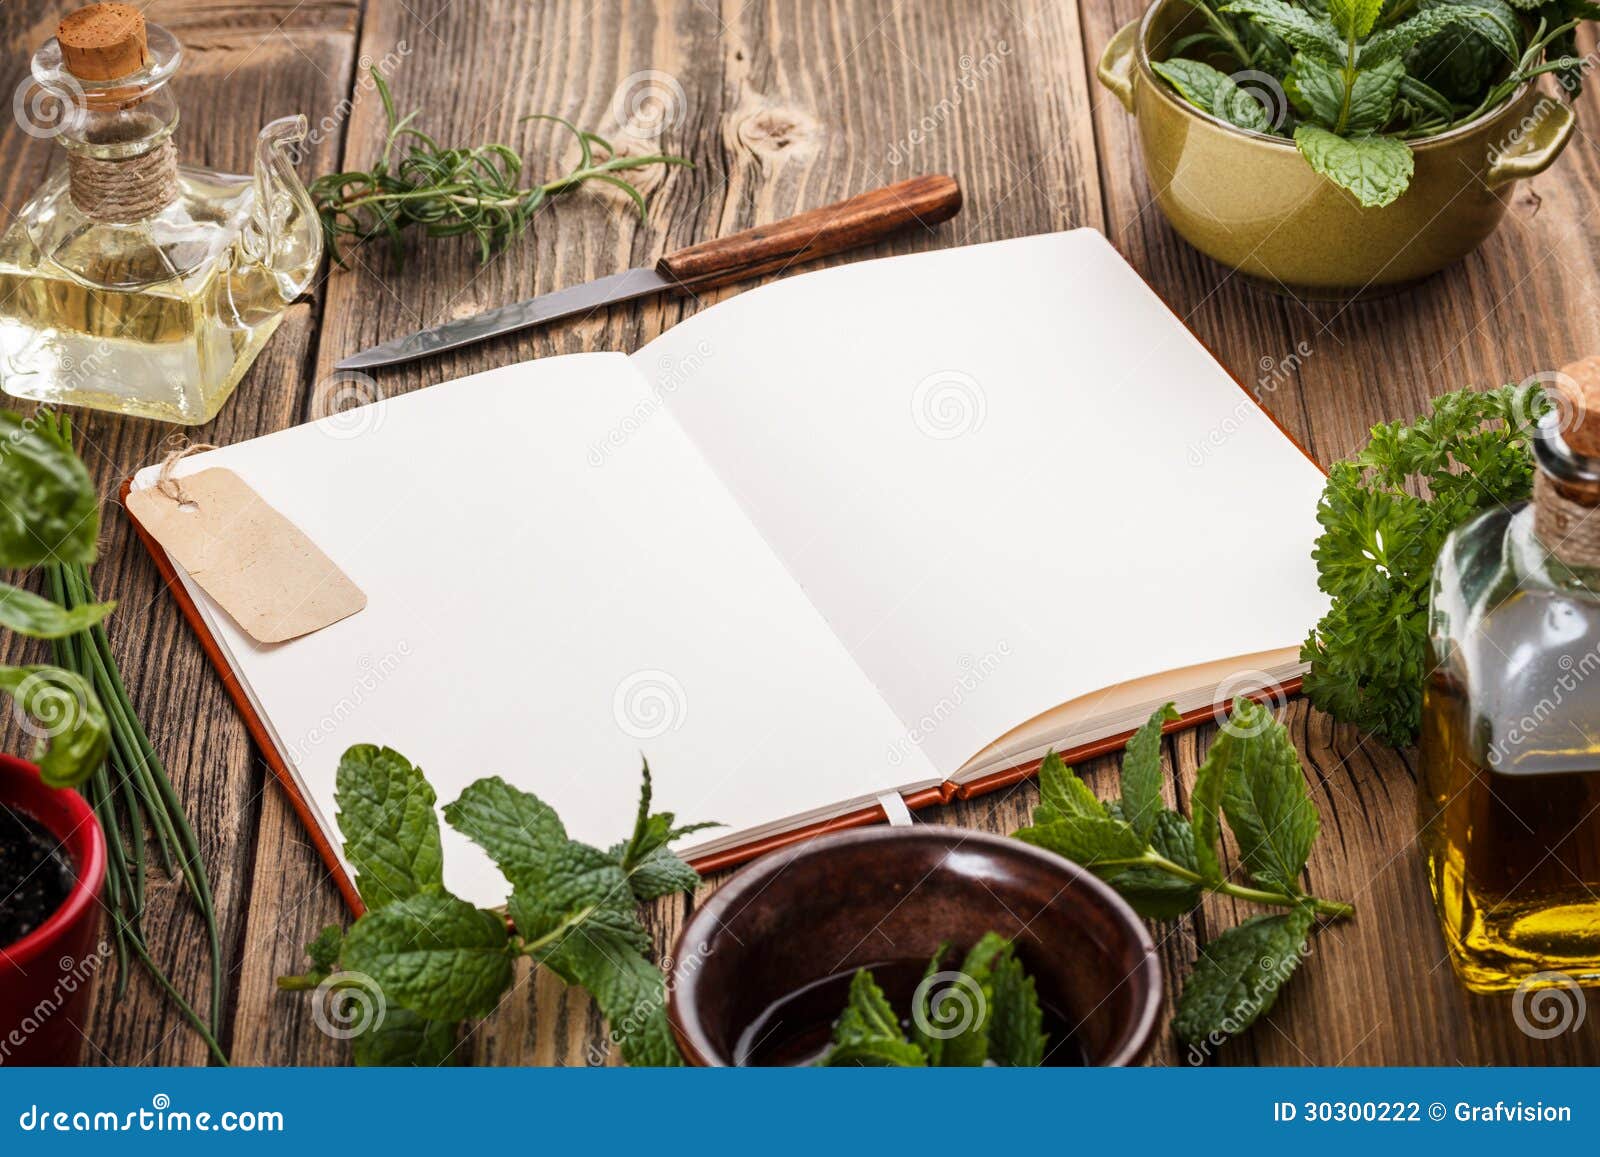 Blank Cookbook With Basic Ingredients For Baking Stock Photo